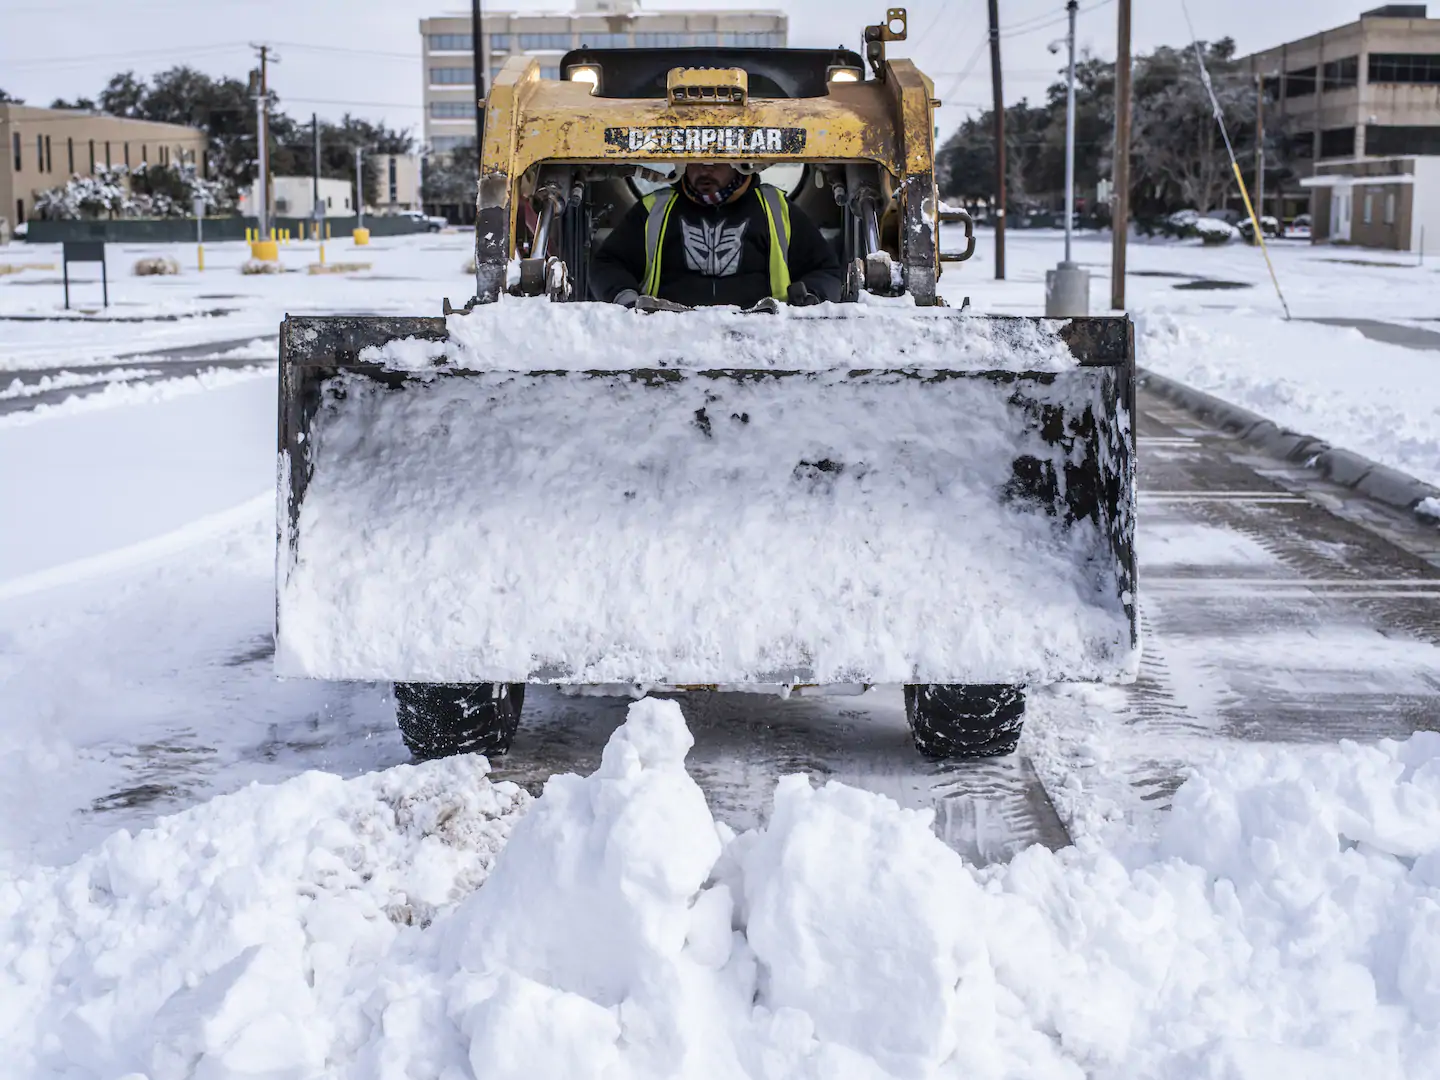 Winter storm live updates: Power outages across Texas, central U.S. after ice, snow hit region